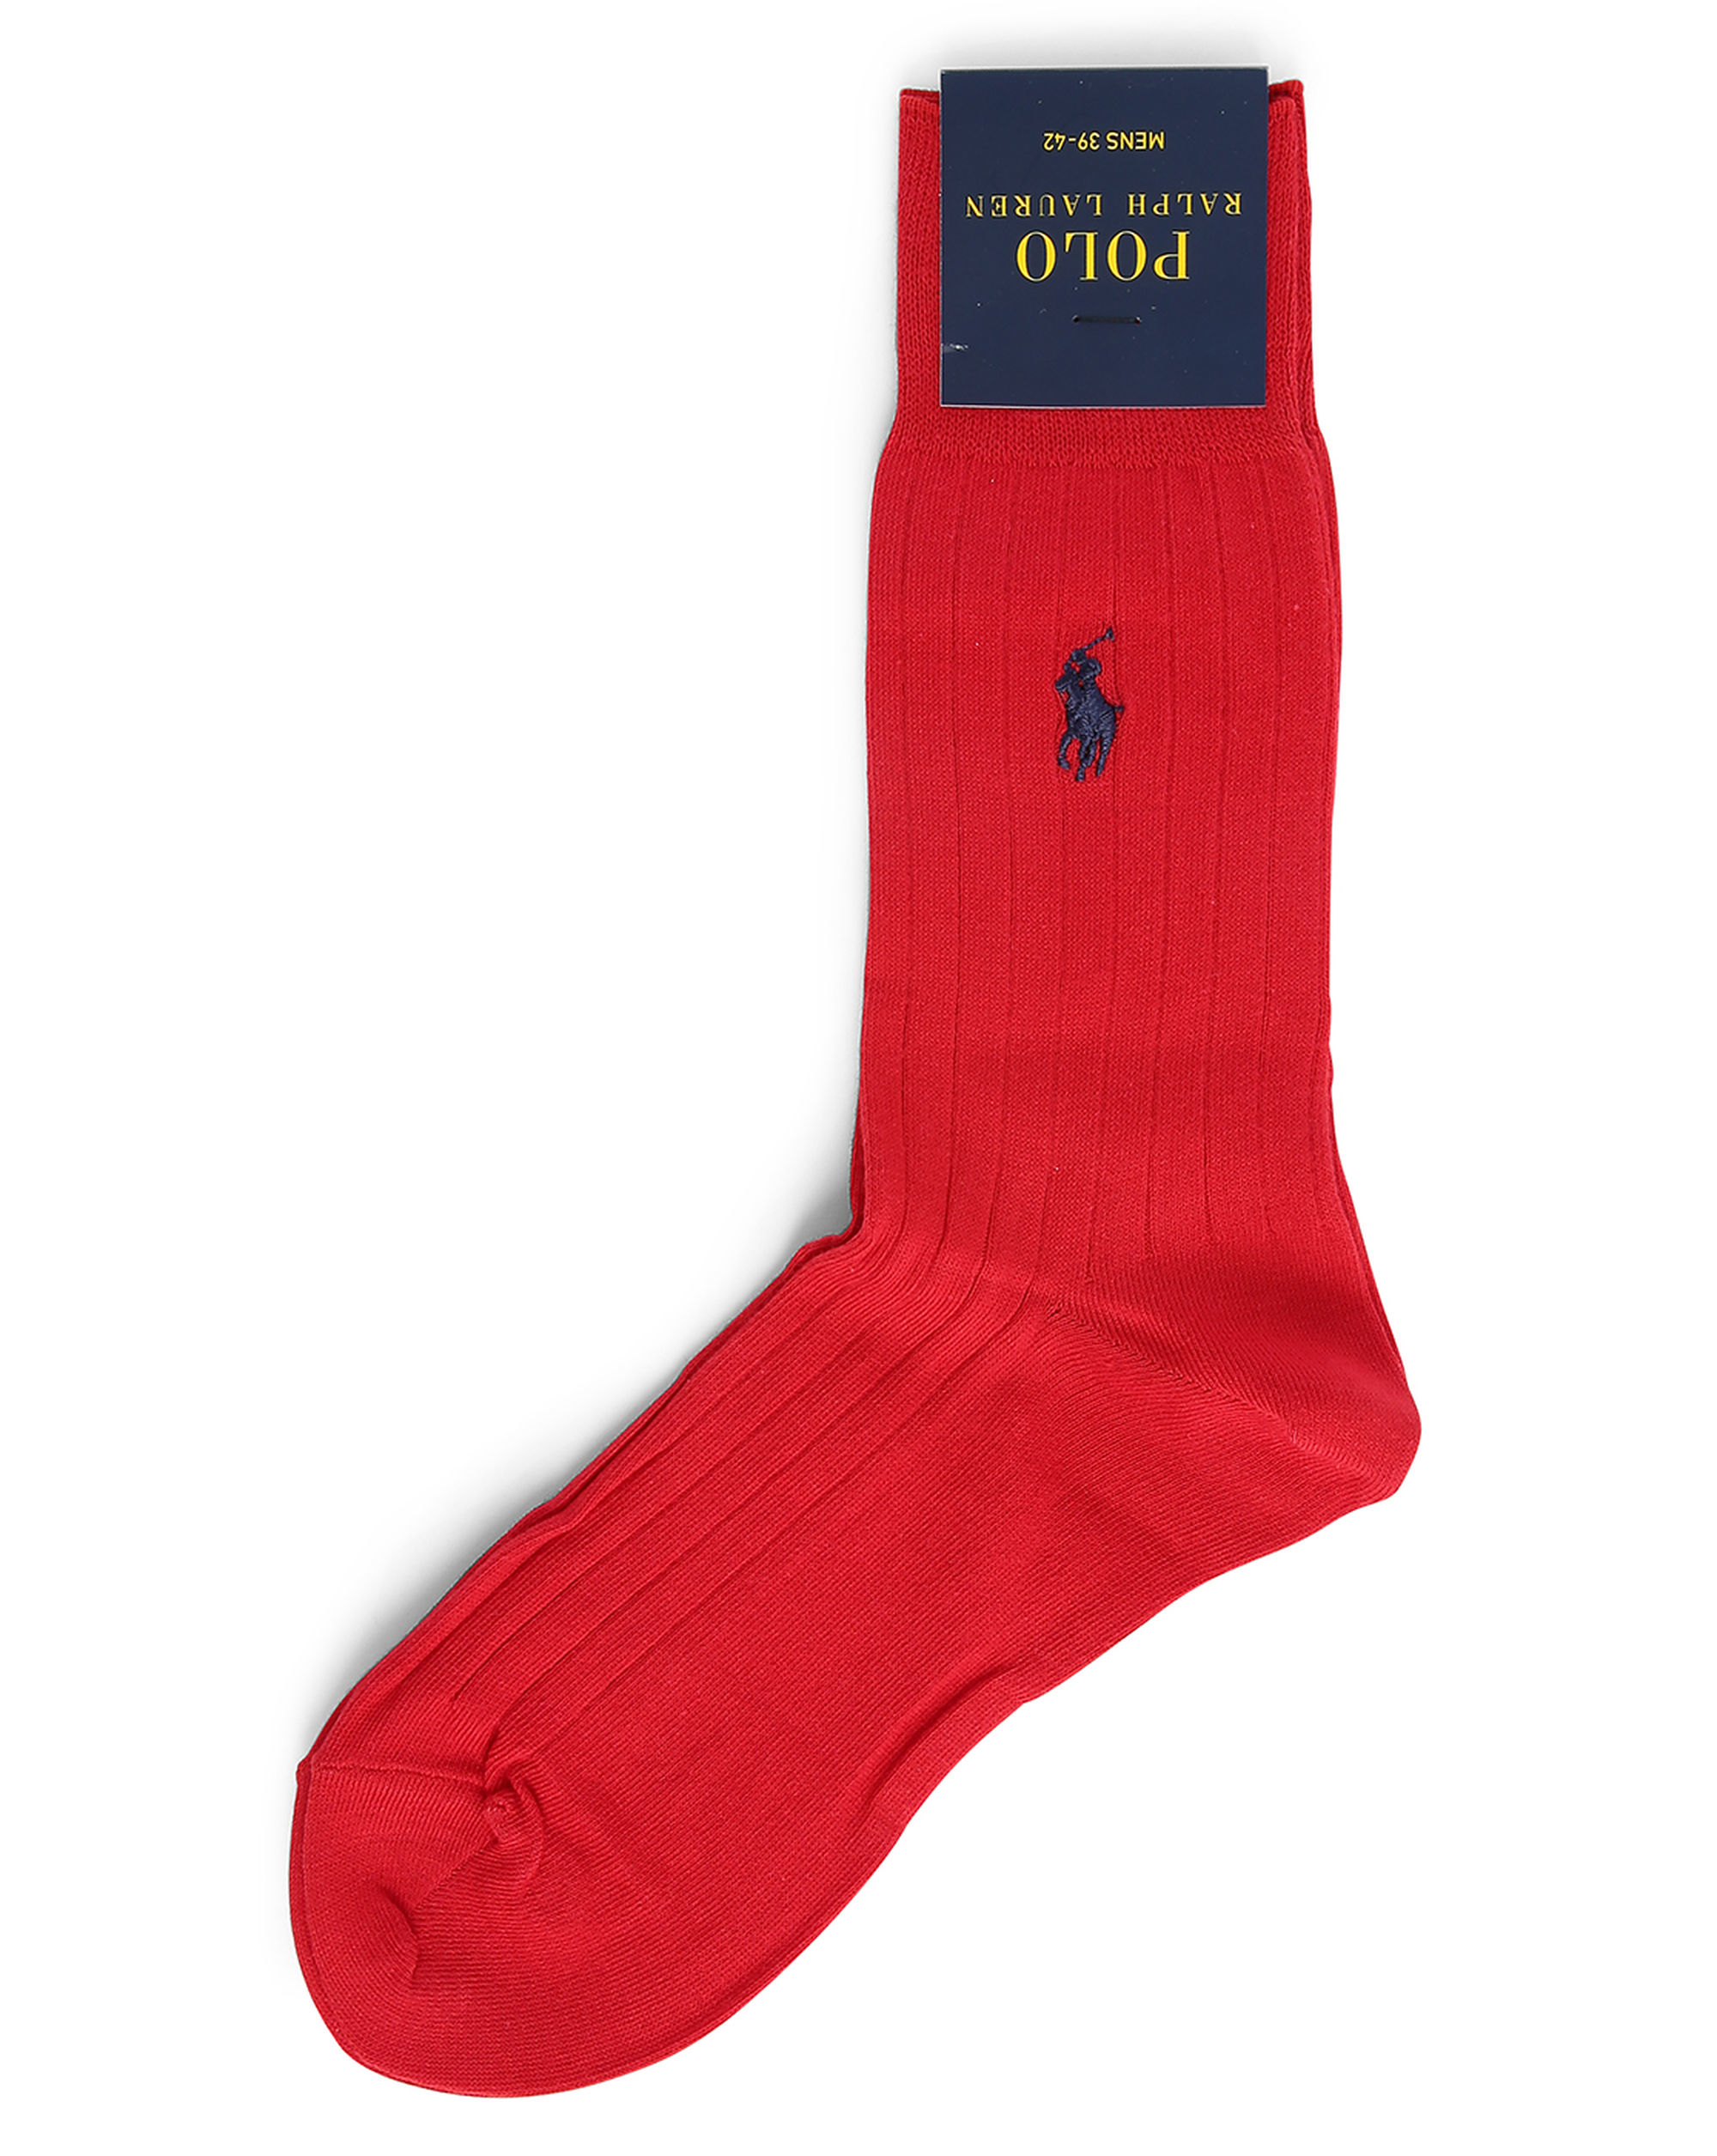 Polo Ralph Lauren Red Red Egyptian Cotton Socks Product 0 906440332 Normal 